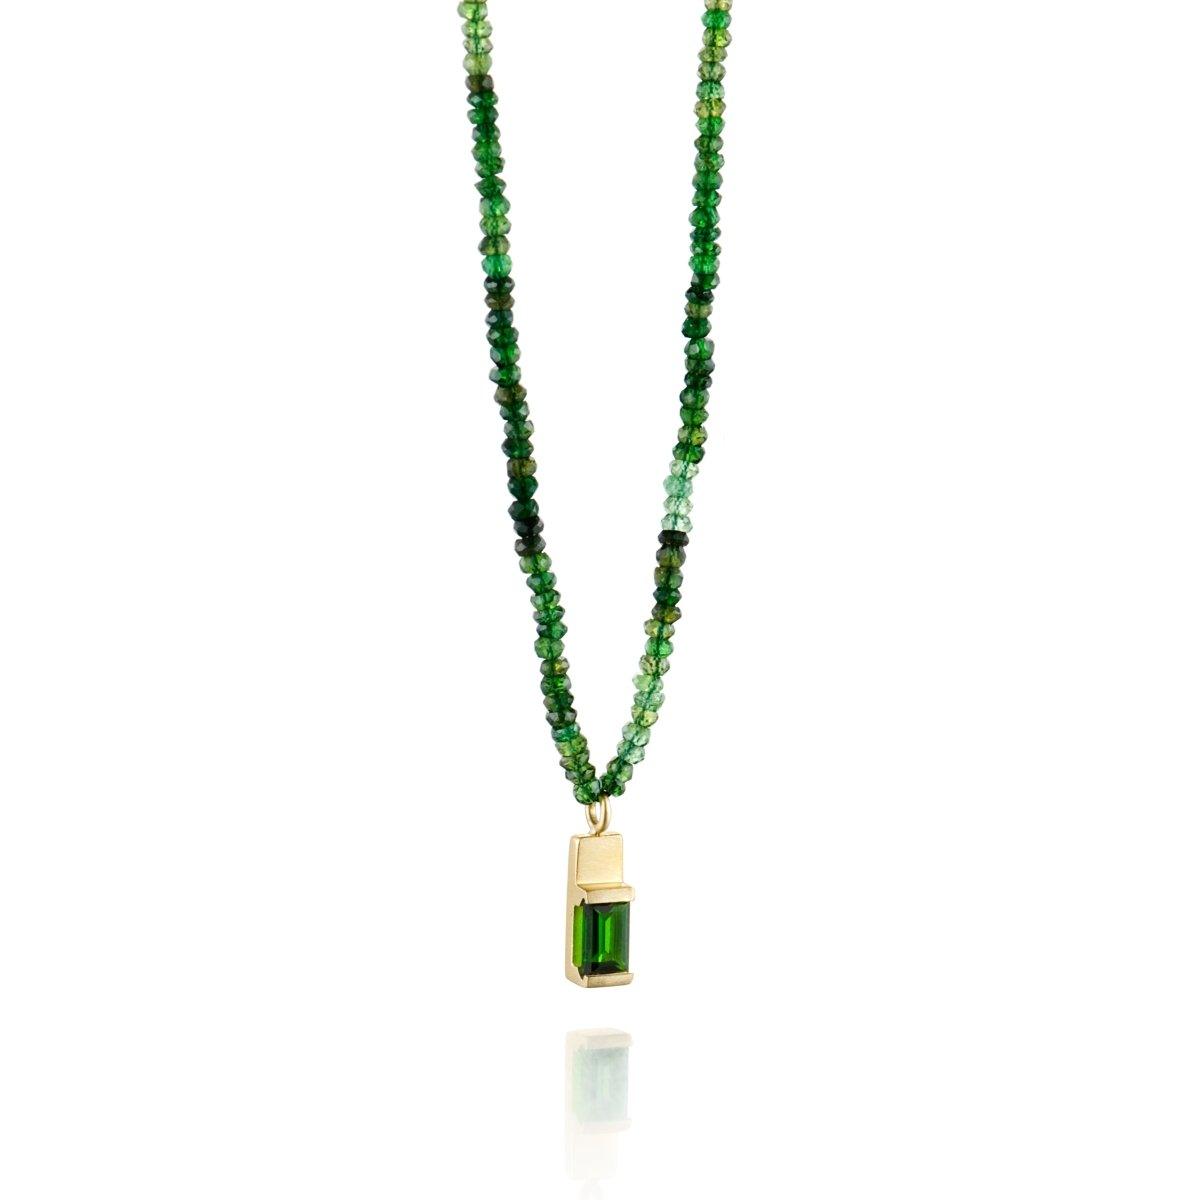 Green is Gold Spark Pendant - Nataly Aponte